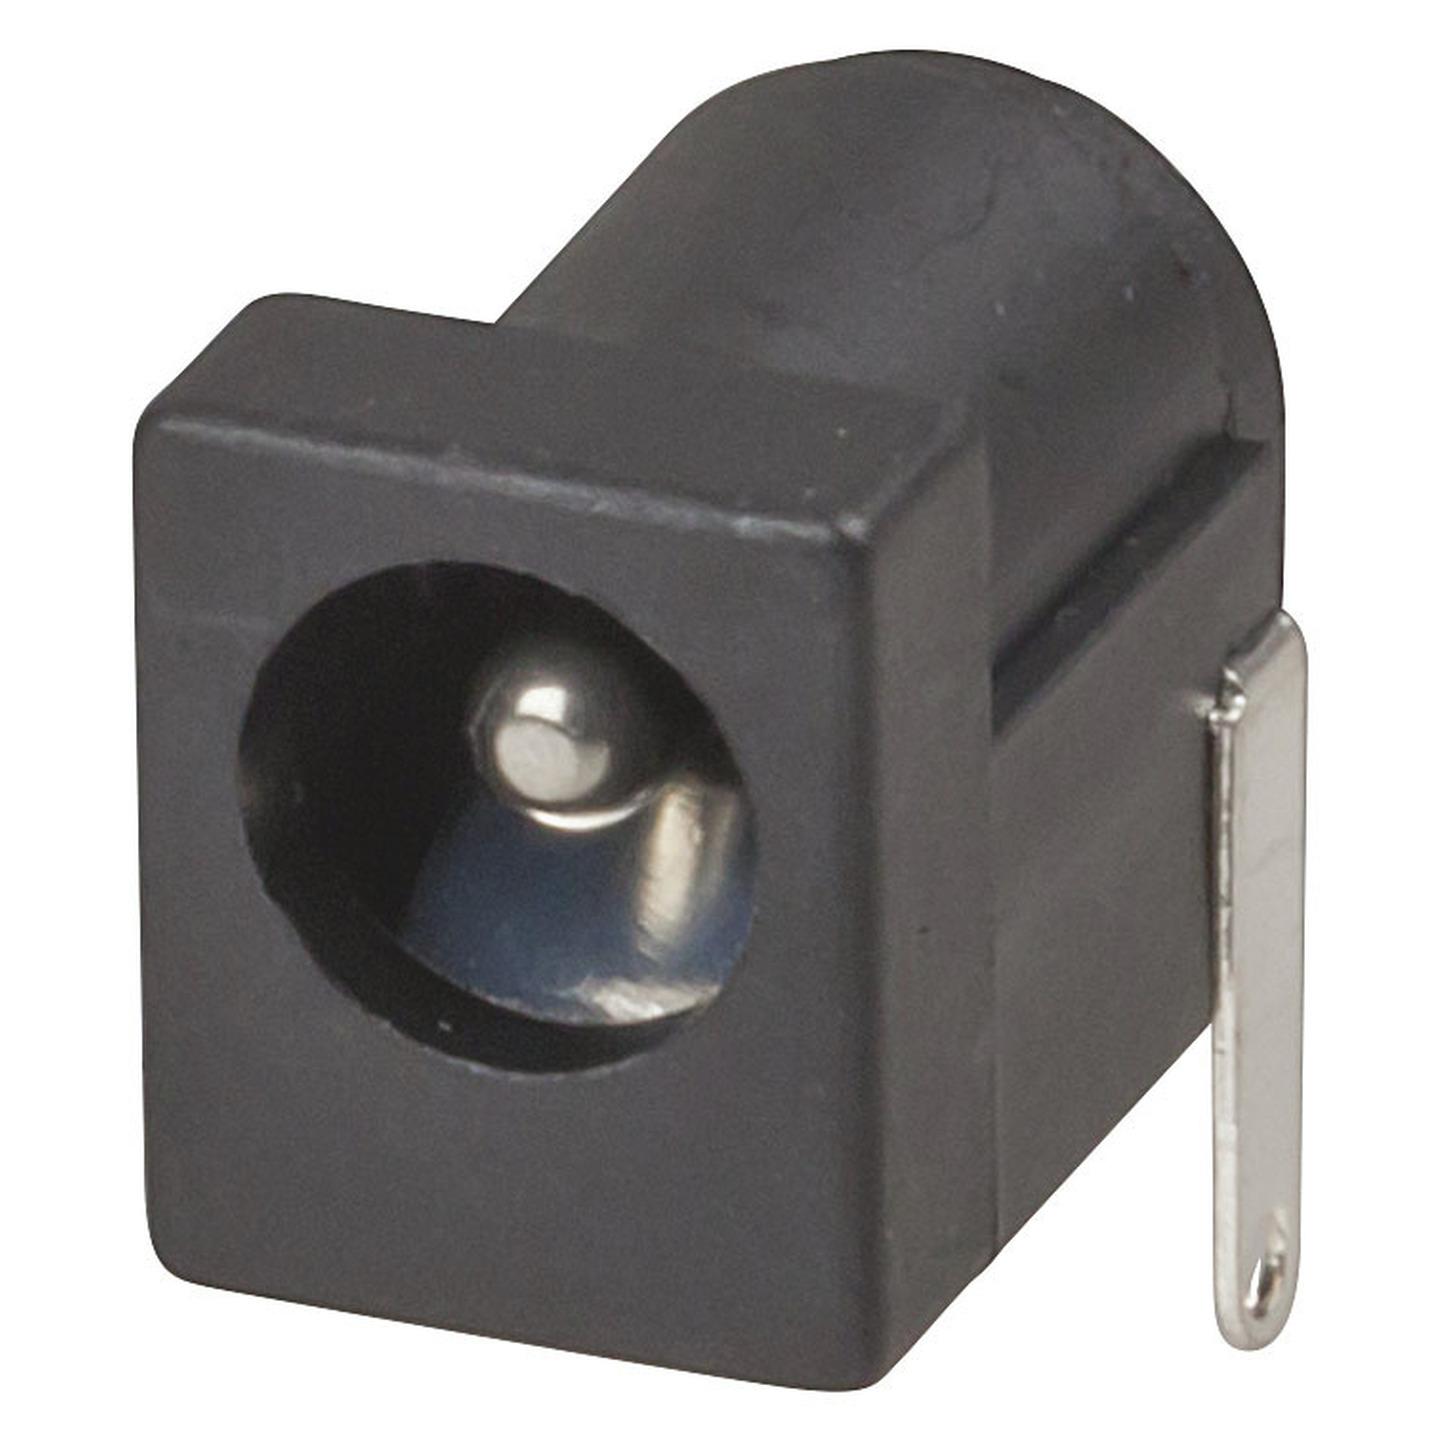 2.5mm PC Mount Male DC Power Connector